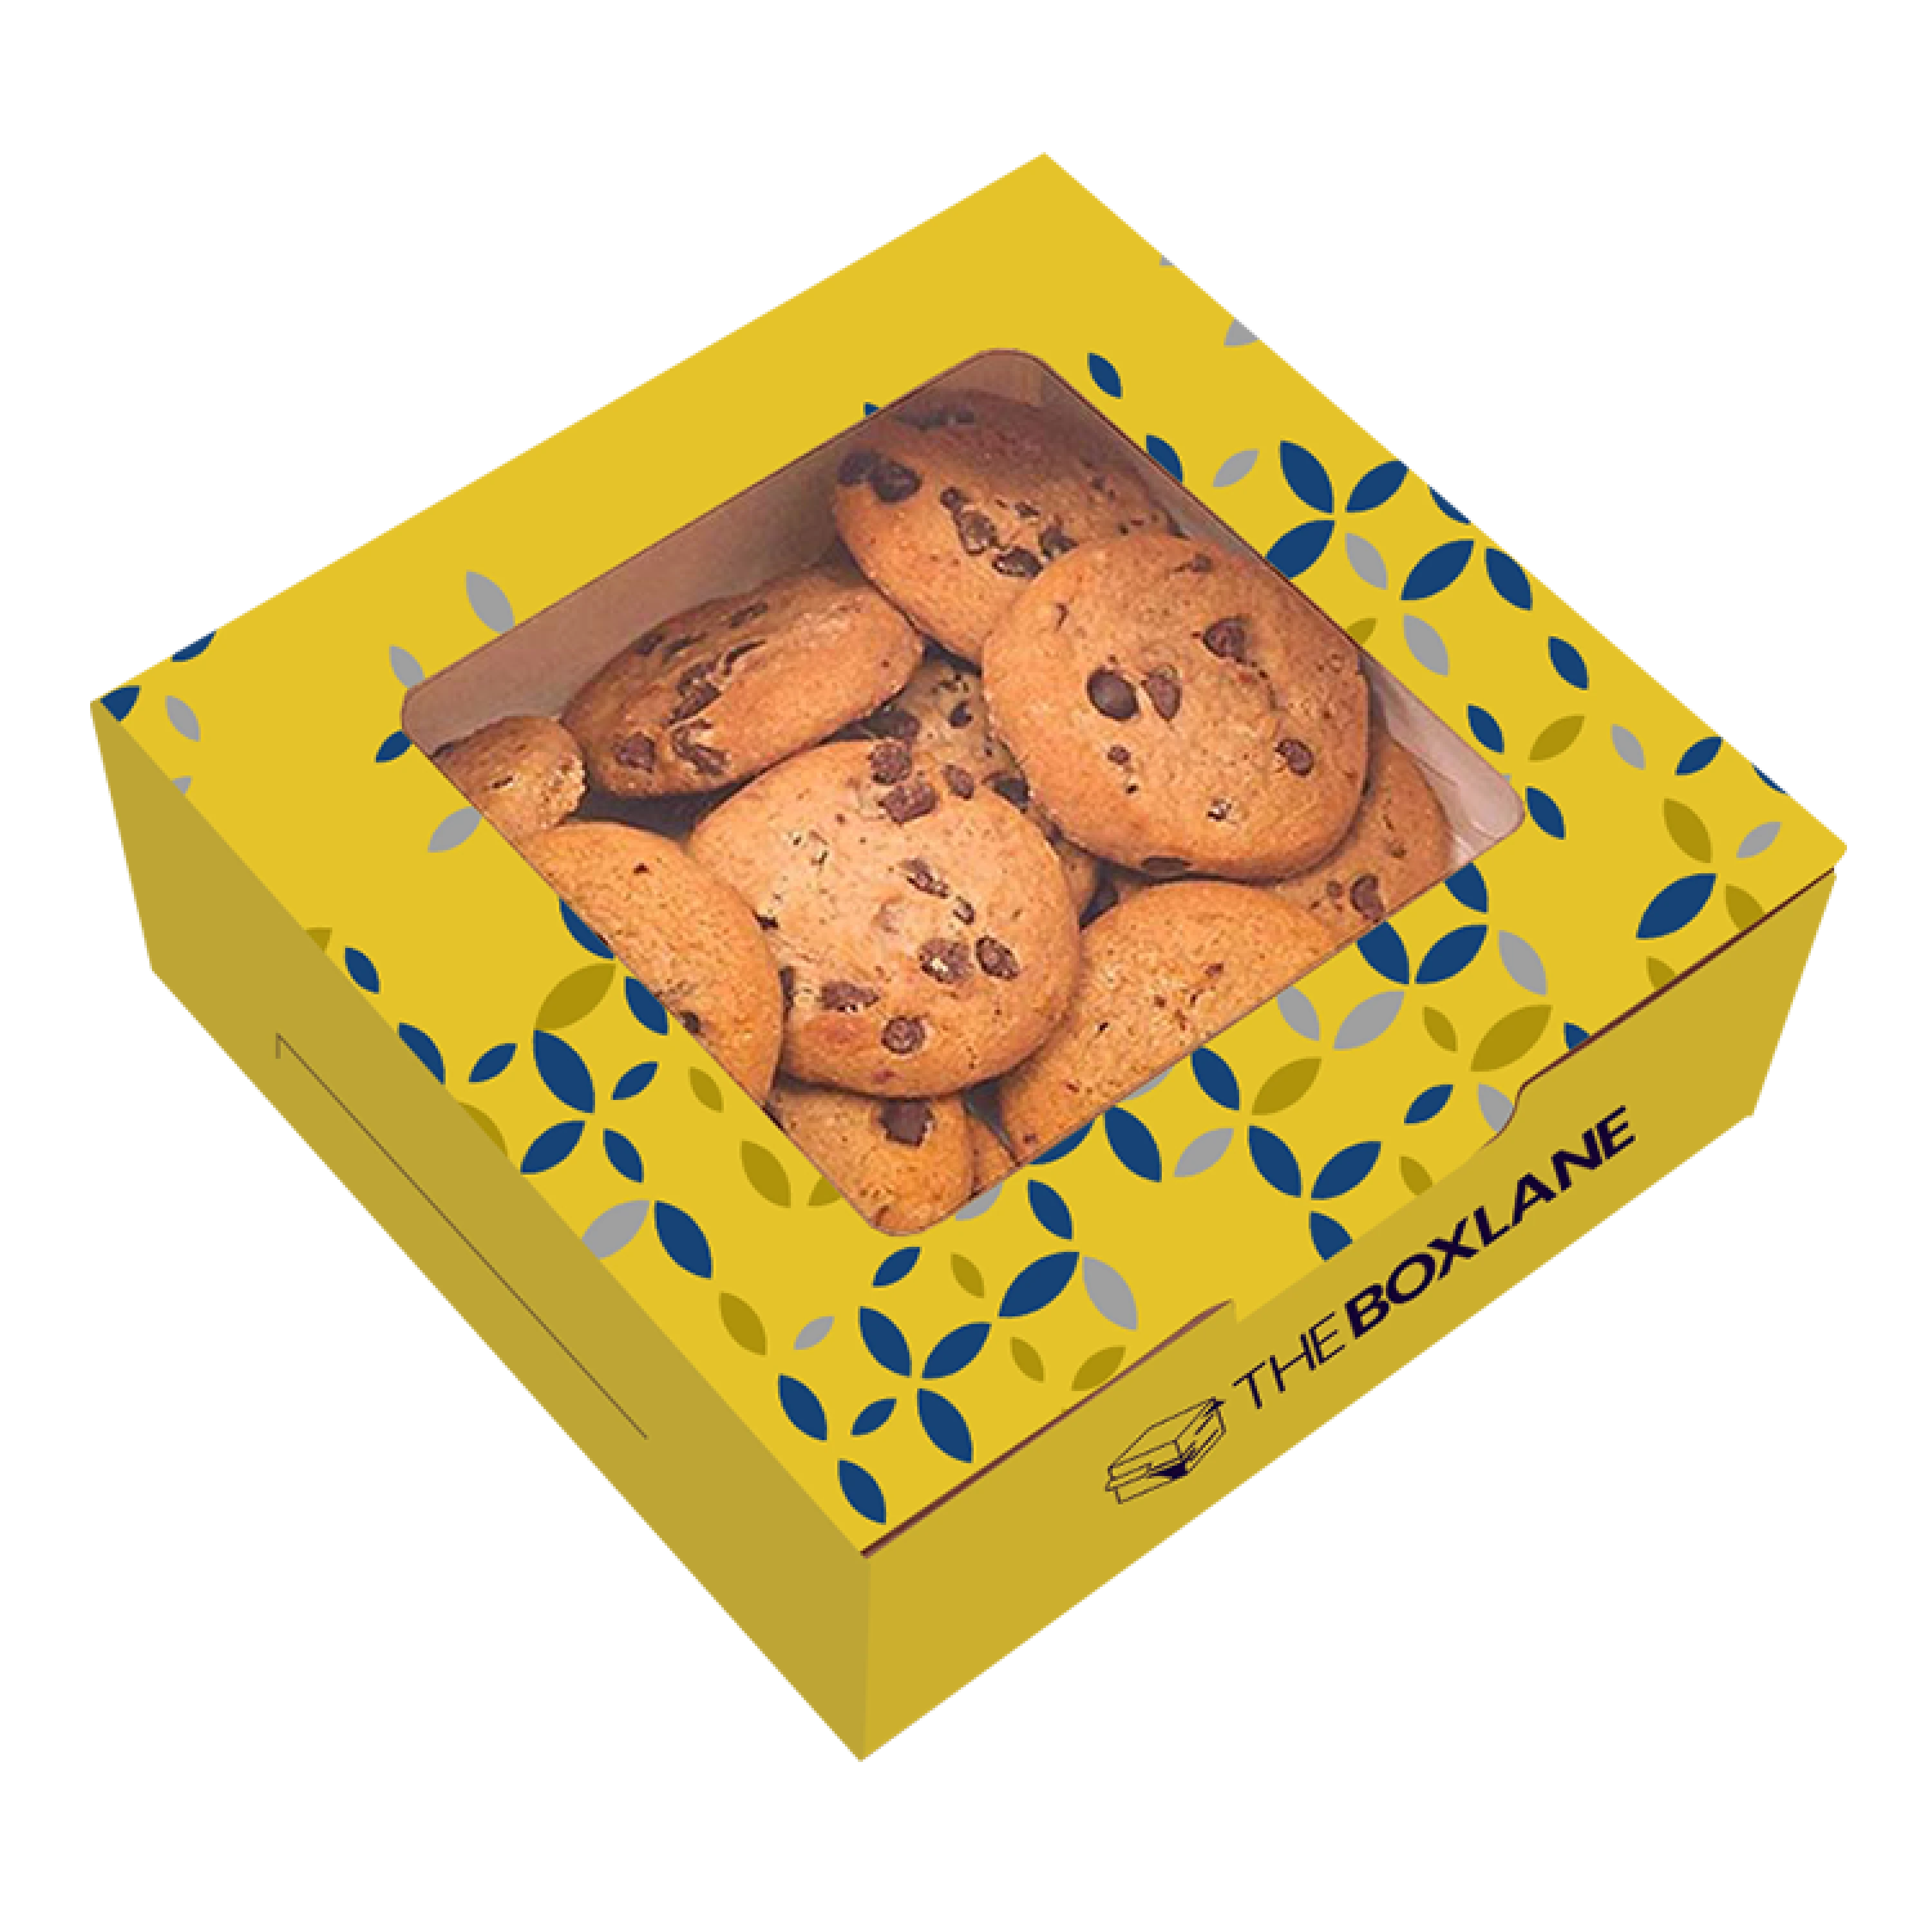 Carousel custom cookie boxes packaging image 4 | The Box Lane